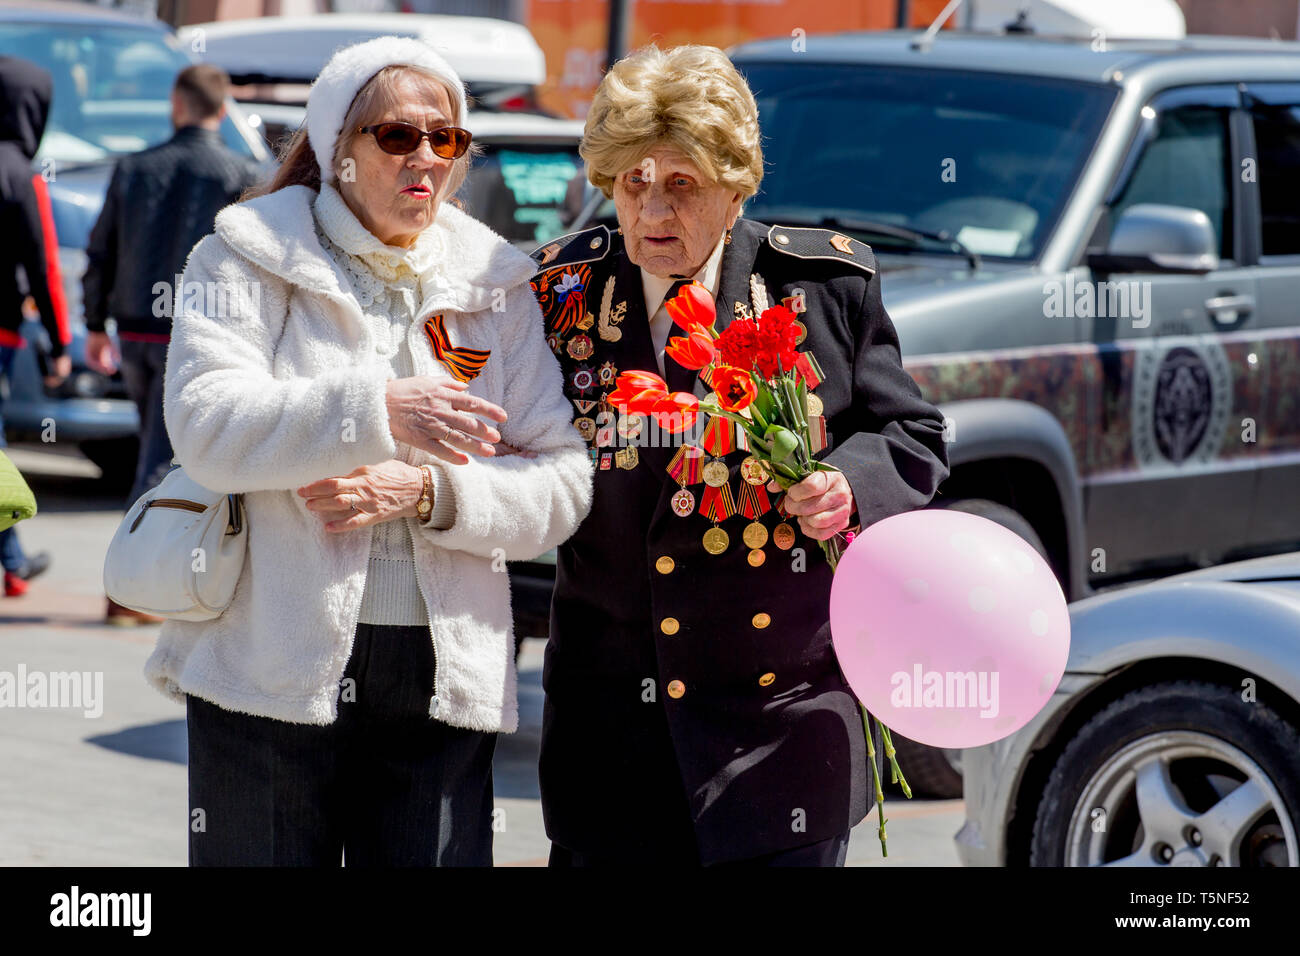 Russia, Vladivostok, 05/09/2018. Old woman, veteran and hero of Great Patriotic War between USSR and Nazi Germany (1941-1945). Annual Victory Day on M Stock Photo